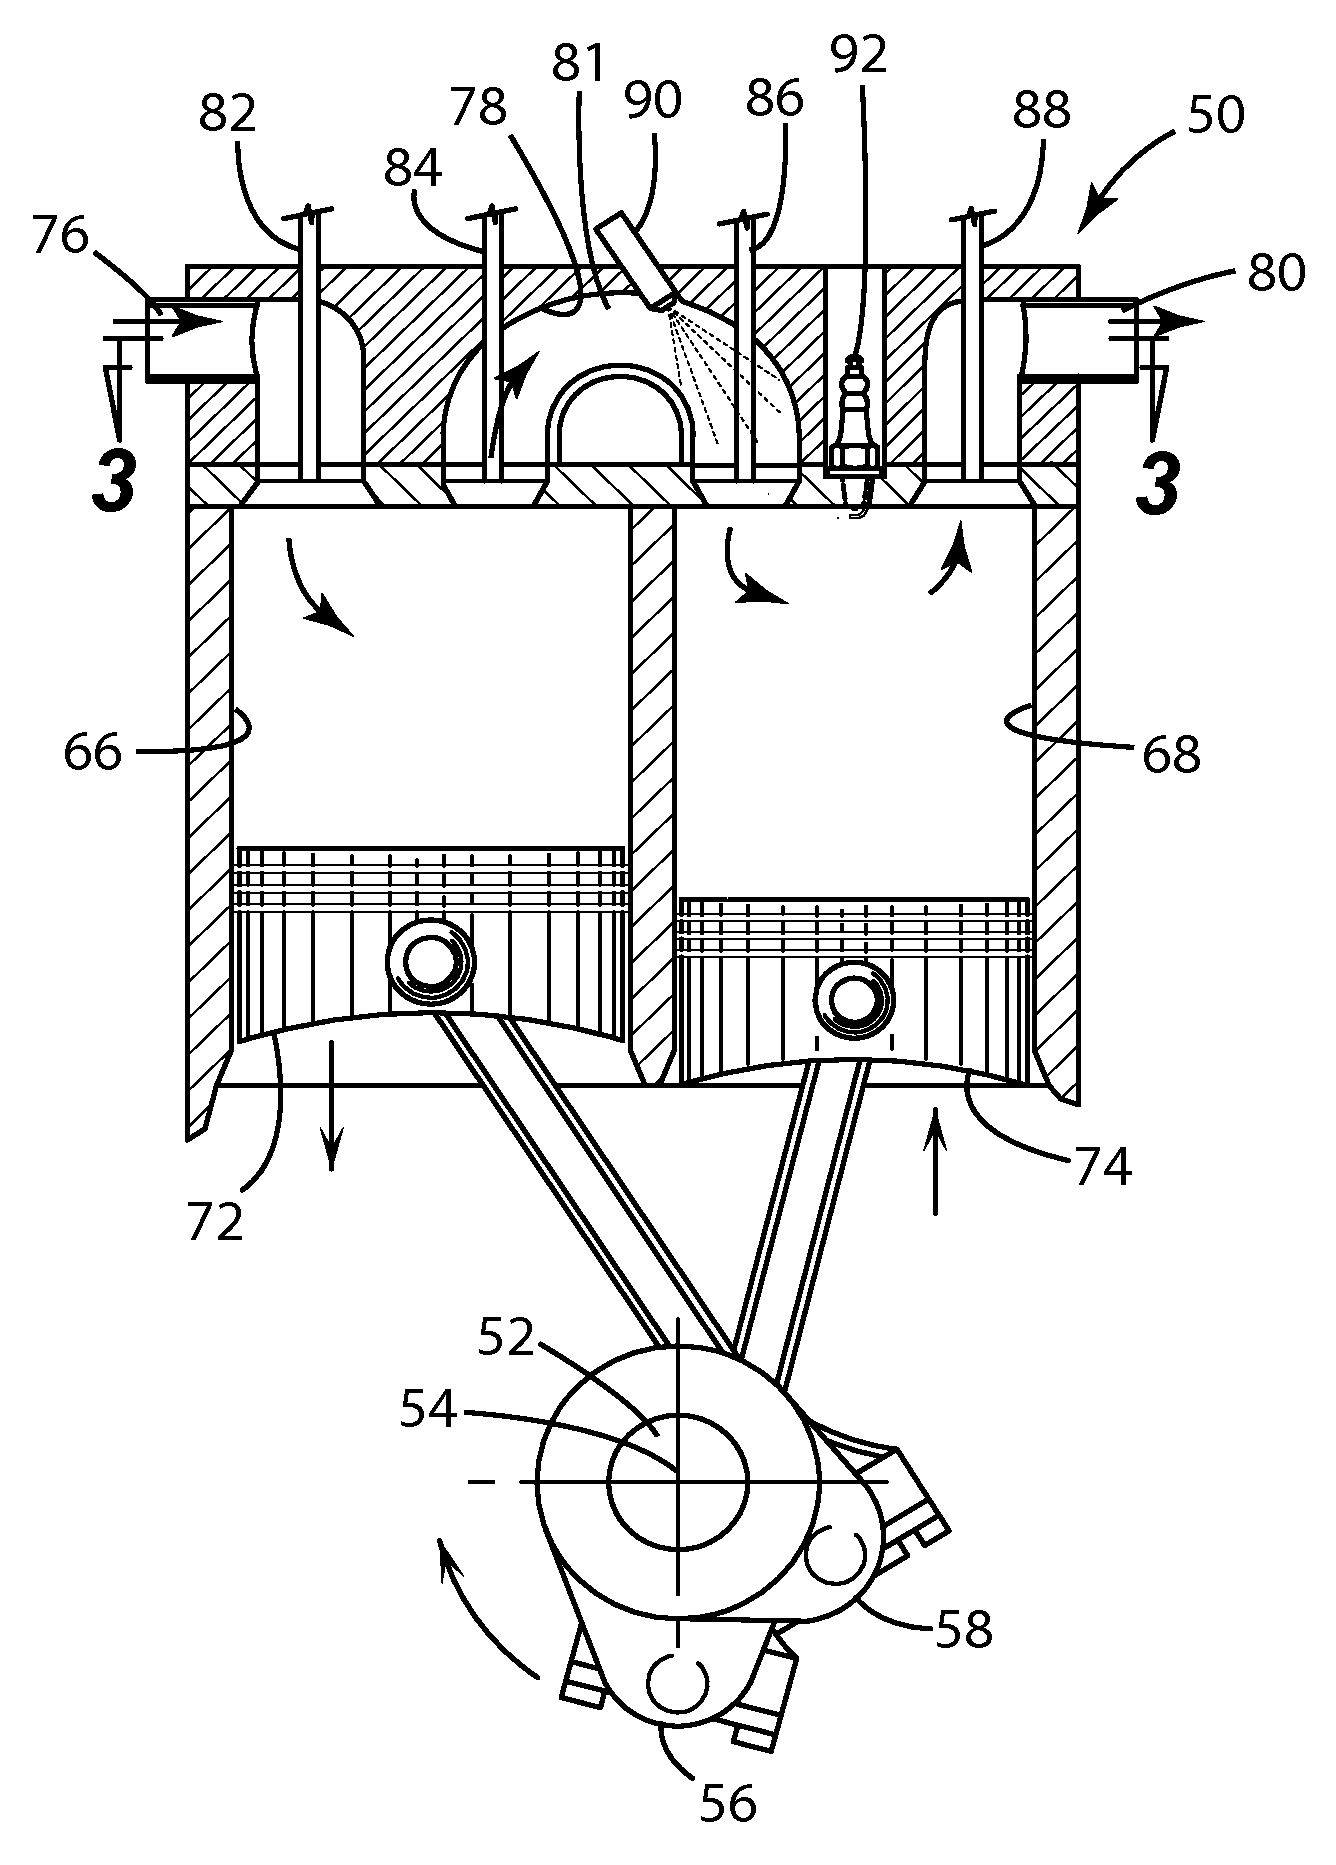 Part-load control in a split-cycle engine